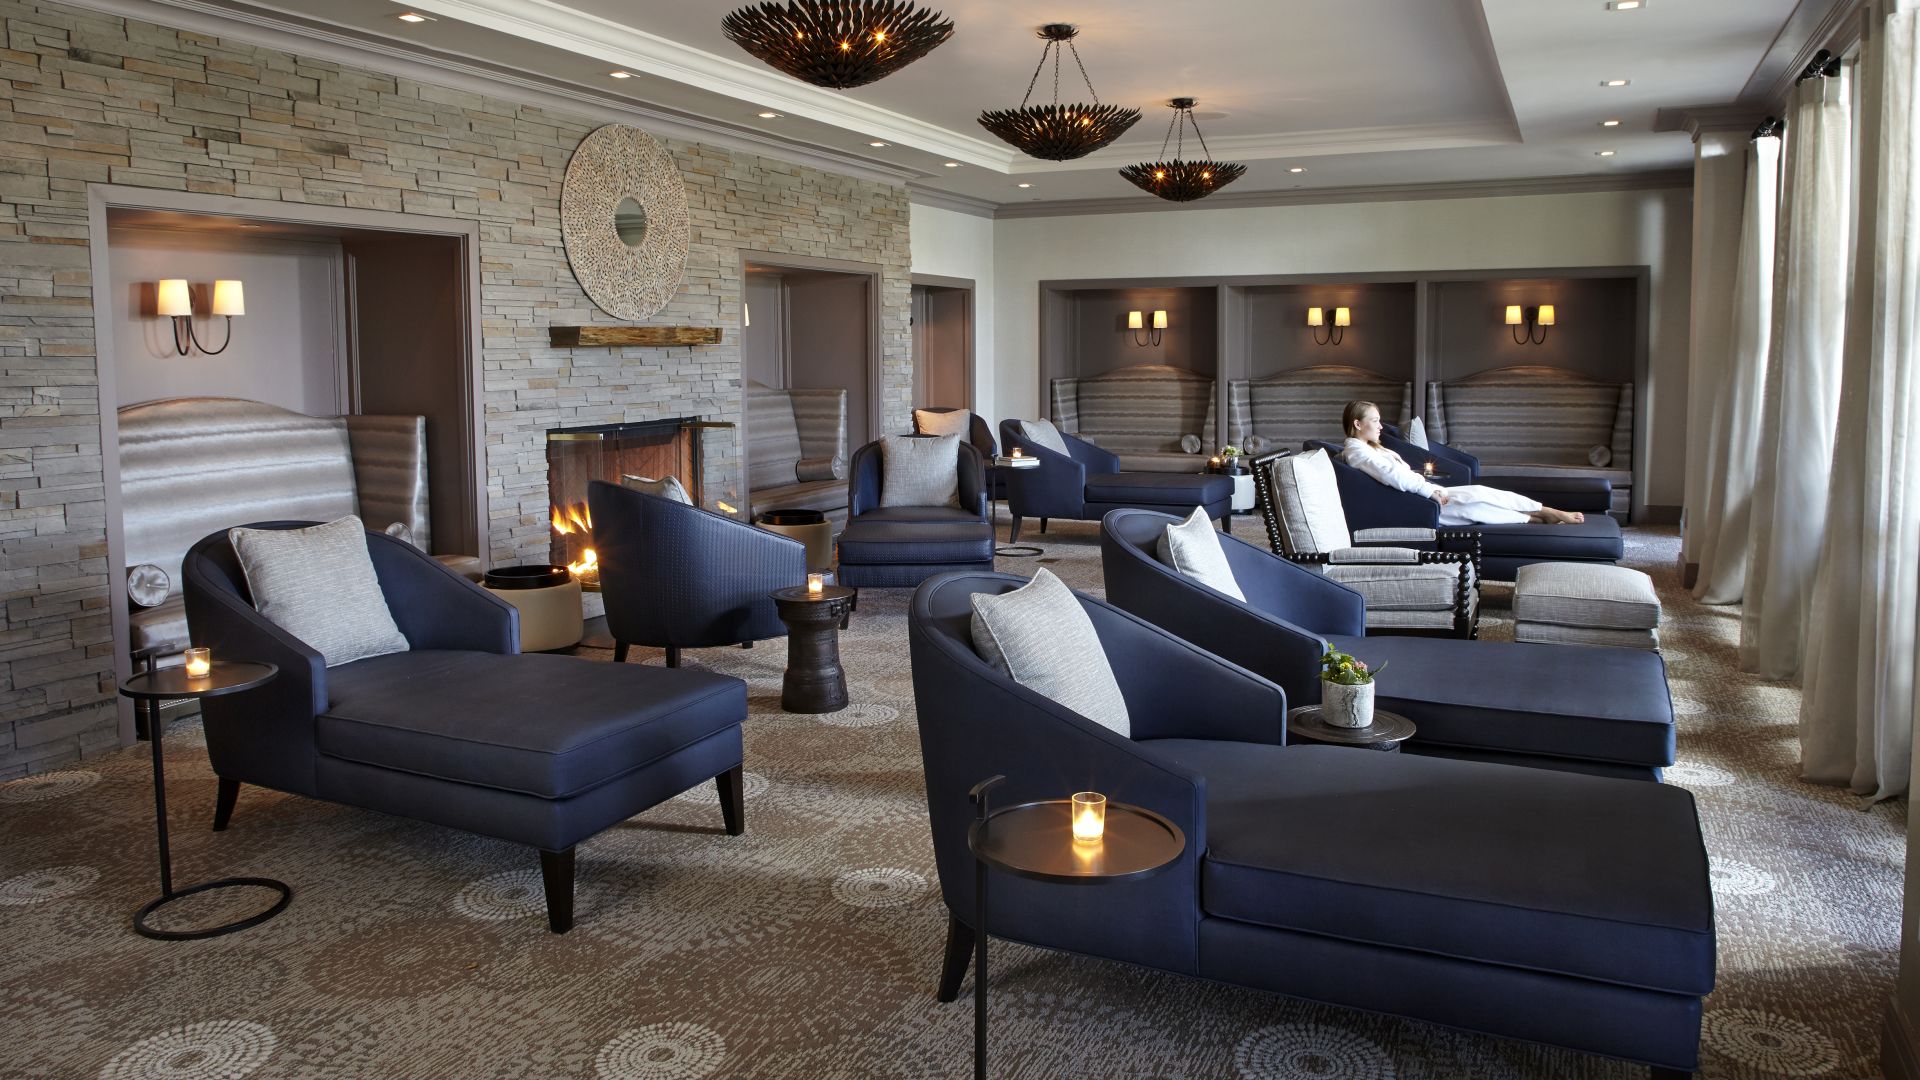 Chaise Lounges looking out floor to ceiling windows in the Whisper Lounge at The Lodge at Woodloch